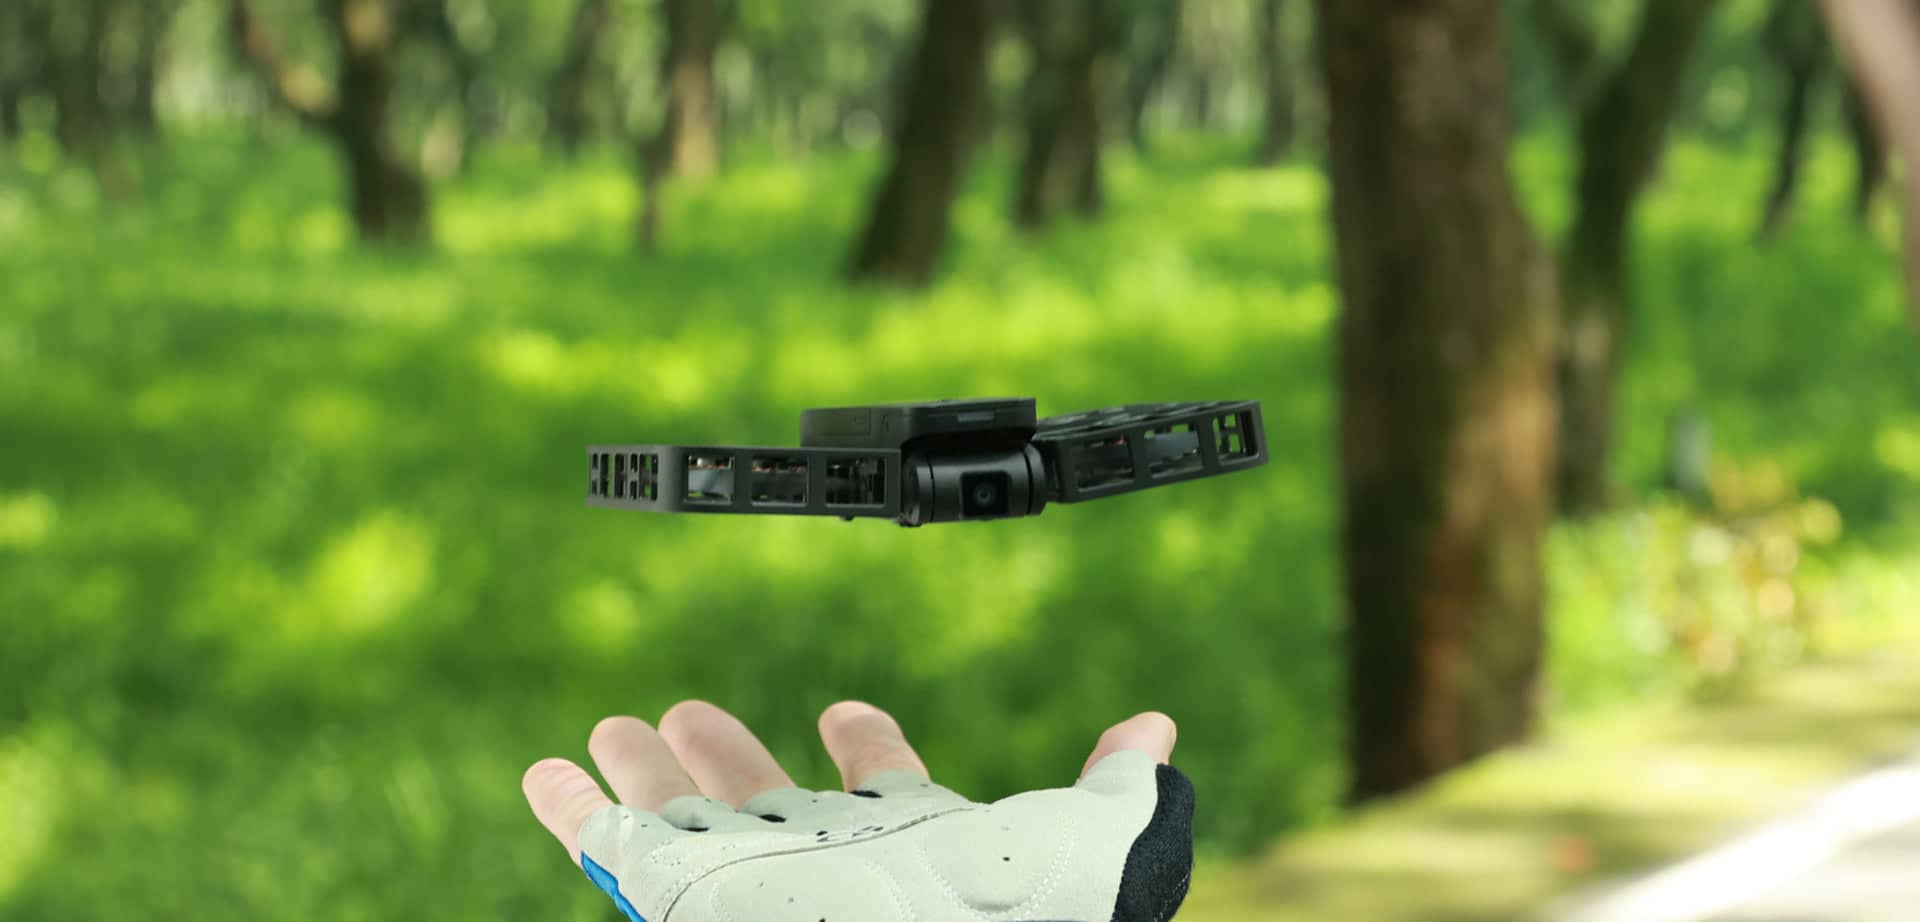 HOVERAir X1 Pocket-Sized | Self-Flying Camera | 2.7K video/1080p HDR | Triple Stabilization 22